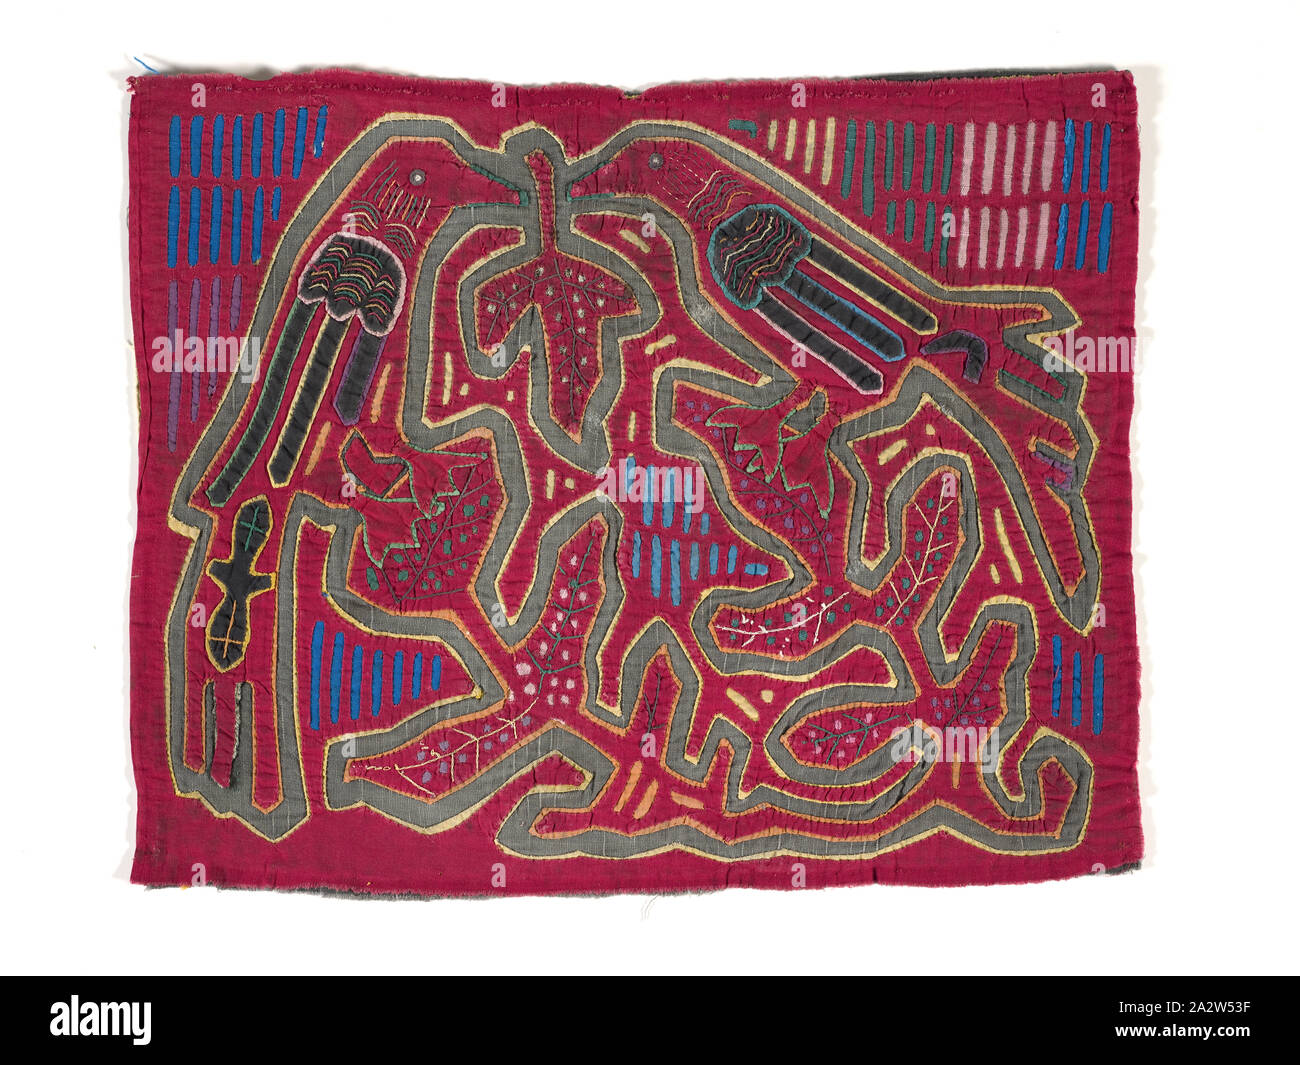 shirt panel (mola), Kuna people, about 1950s, appliqued cotton, 13-3/4 x 16-7/8 in., Textile and Fashion Arts Stock Photo